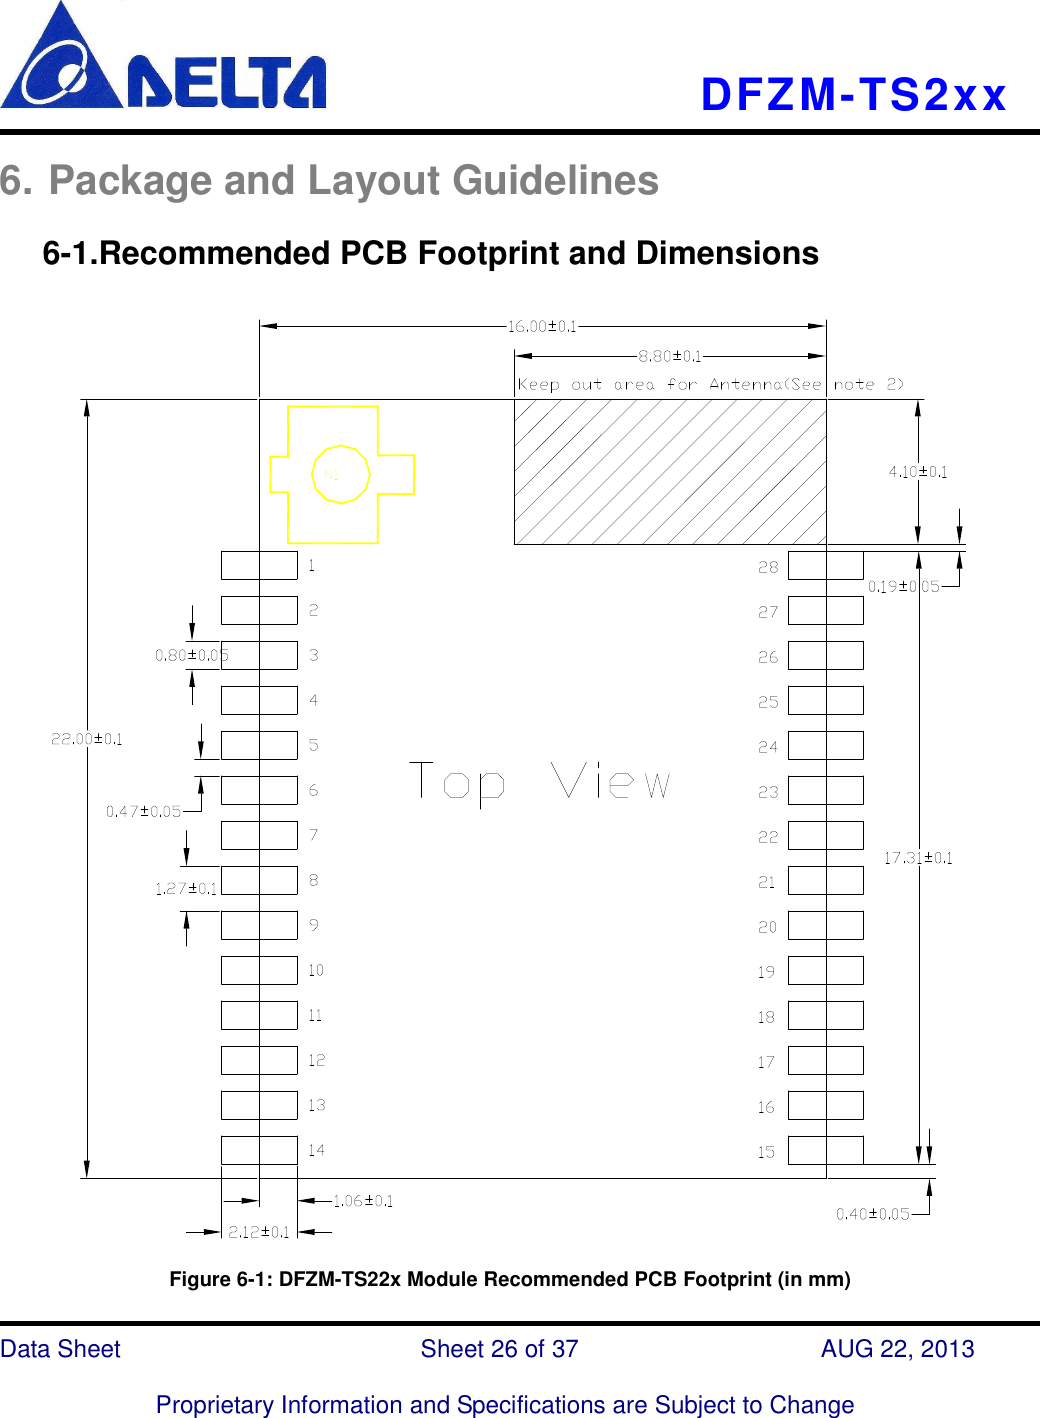    DFZM-TS2xx   Data Sheet                              Sheet 26 of 37                    AUG 22, 2013  Proprietary Information and Specifications are Subject to Change 6. Package and Layout Guidelines      6-1.Recommended PCB Footprint and Dimensions                      Figure 6-1: DFZM-TS22x Module Recommended PCB Footprint (in mm) 